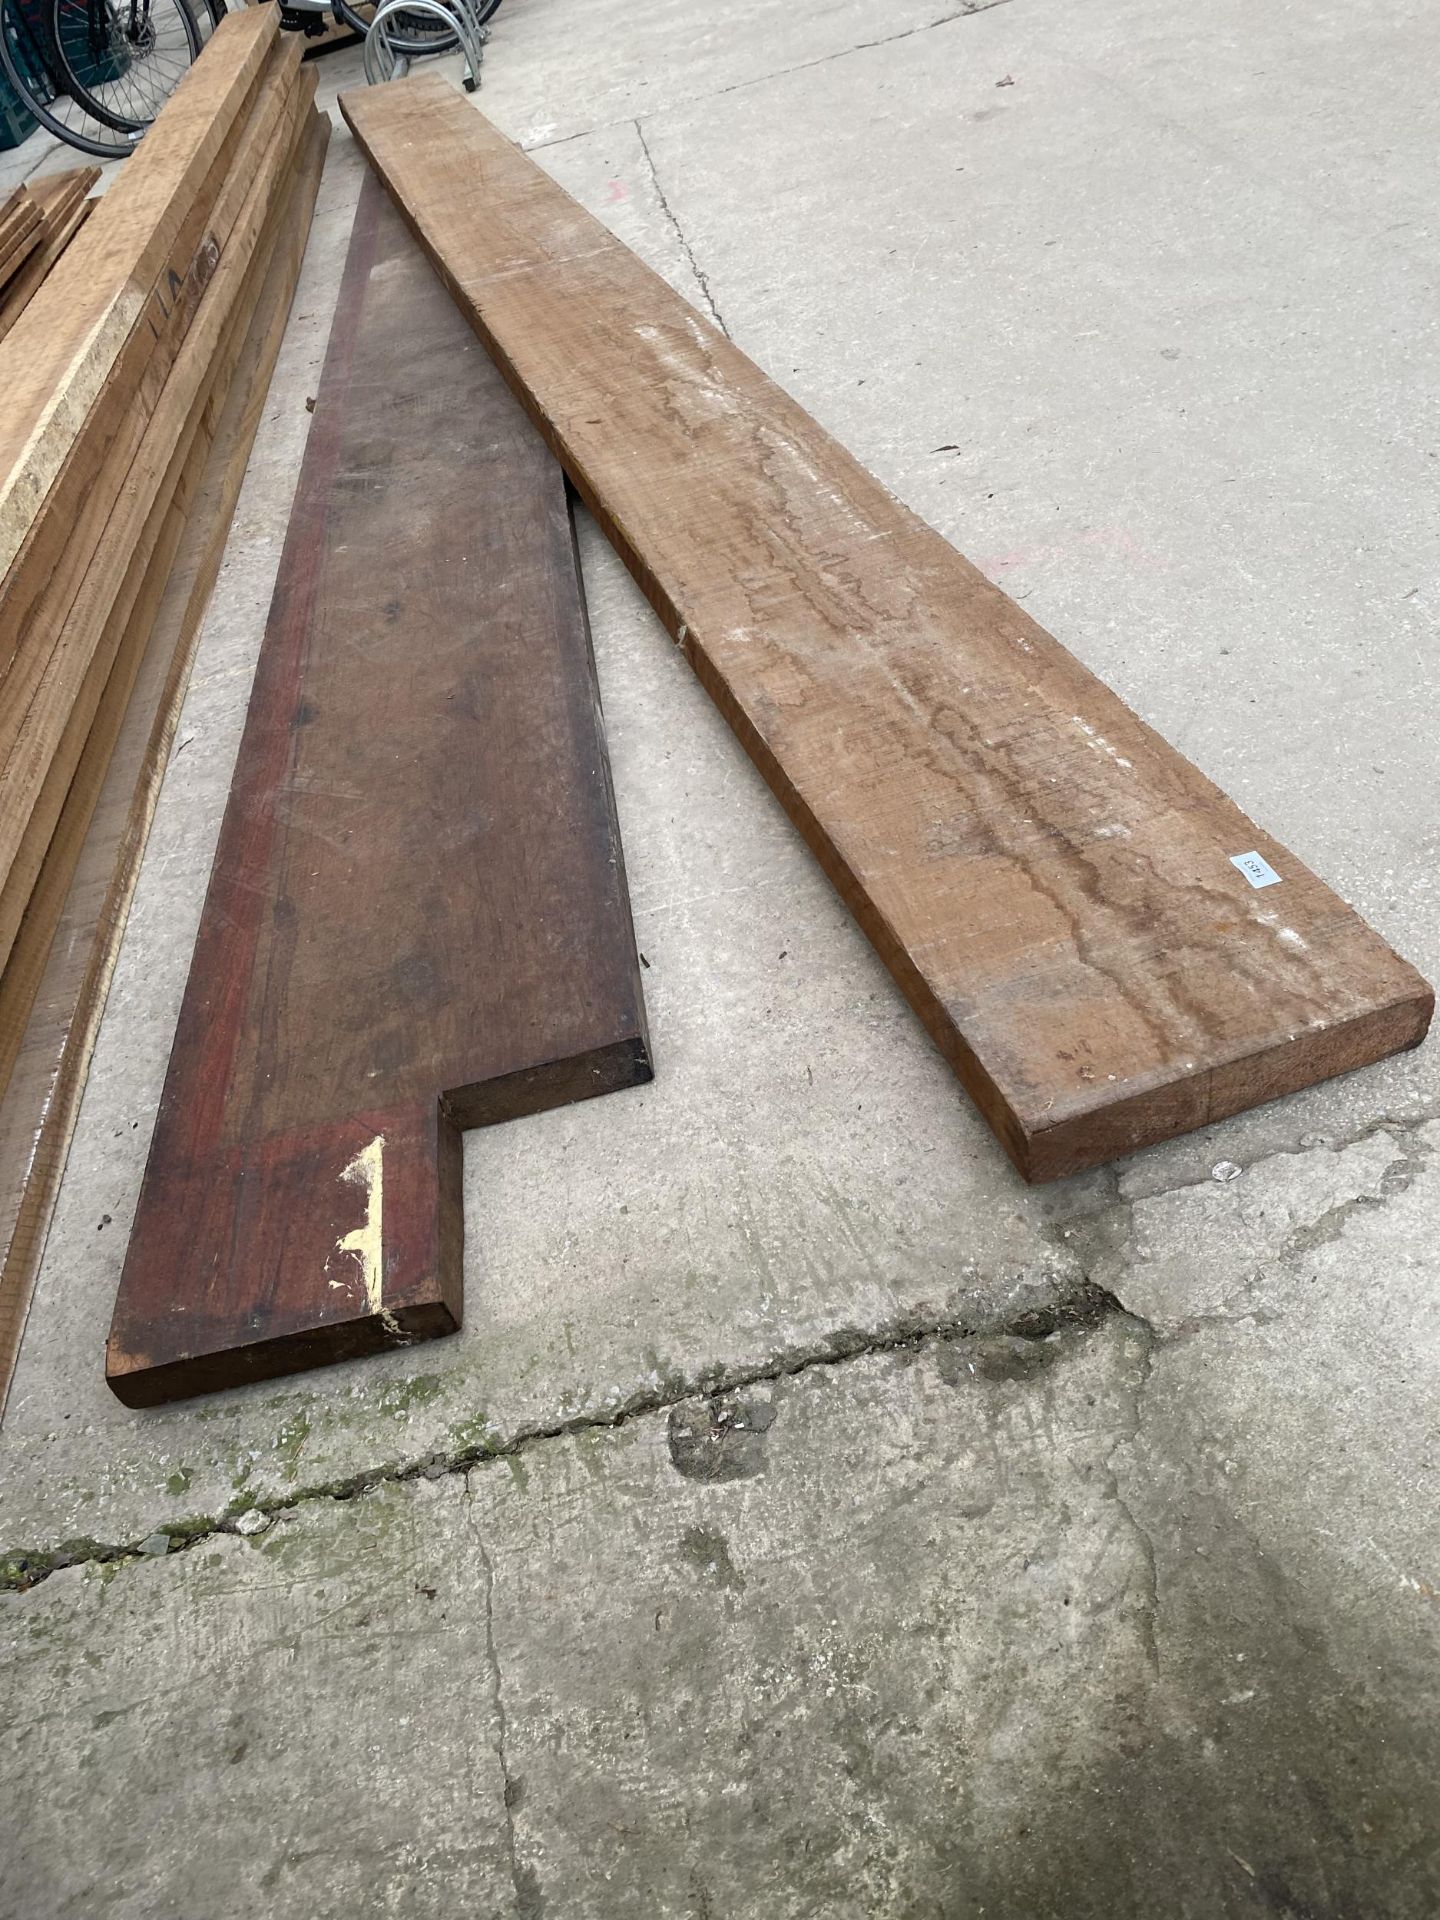 A LENGTH OF IROKO TIMBER (L:14FT 2" W:12" T:2.5") AND A FURTHER PIECE OF MAHOGANY (L:10FT 6" W:16"